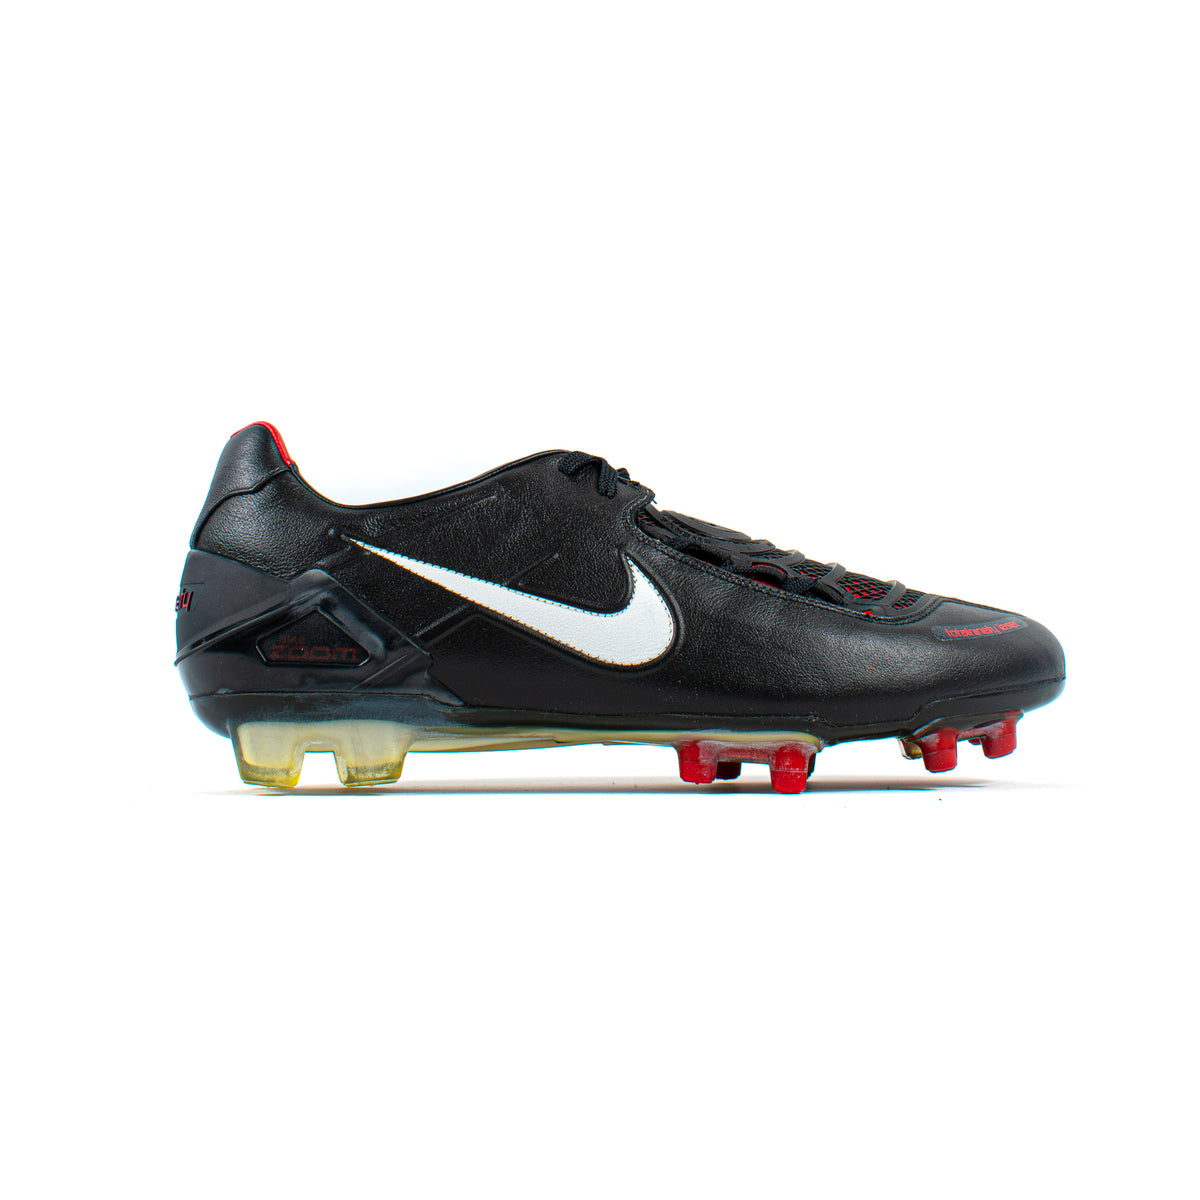 Nike Total 90 Laser I Red – Classic Soccer Cleats